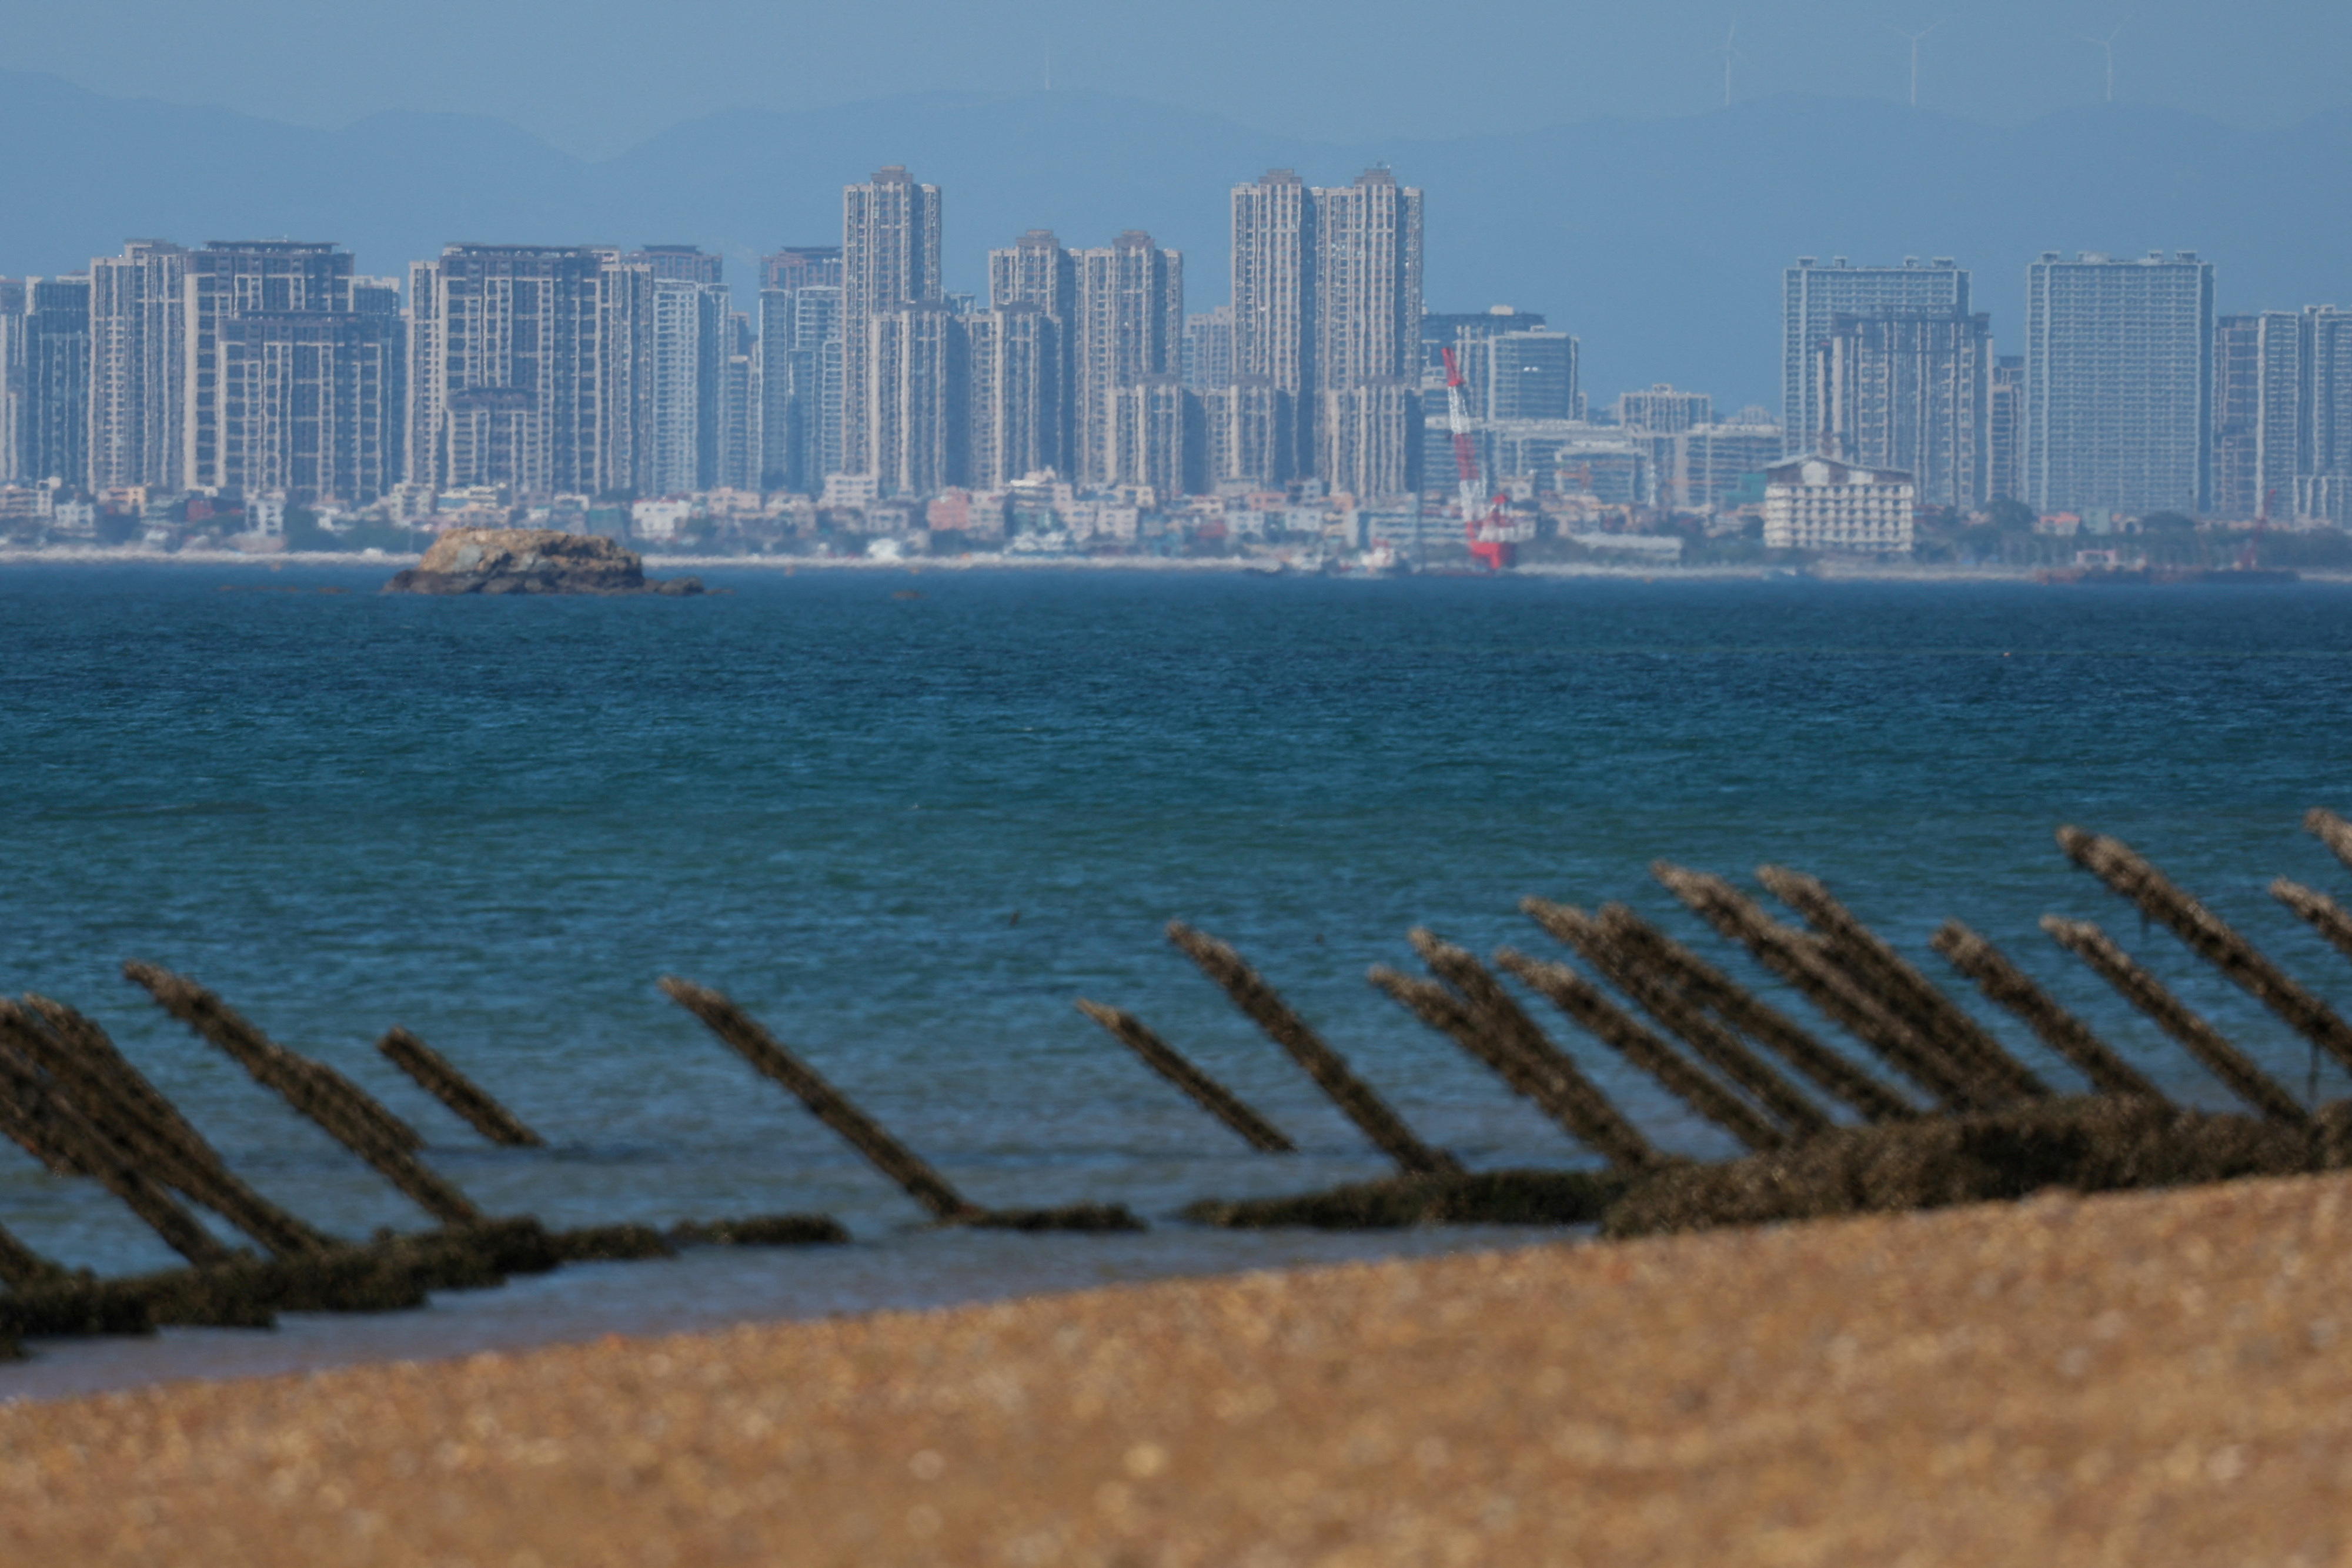 Anti-landing barricades are pictured on the beach, with China's Xiamen city in the background, in Kinmen